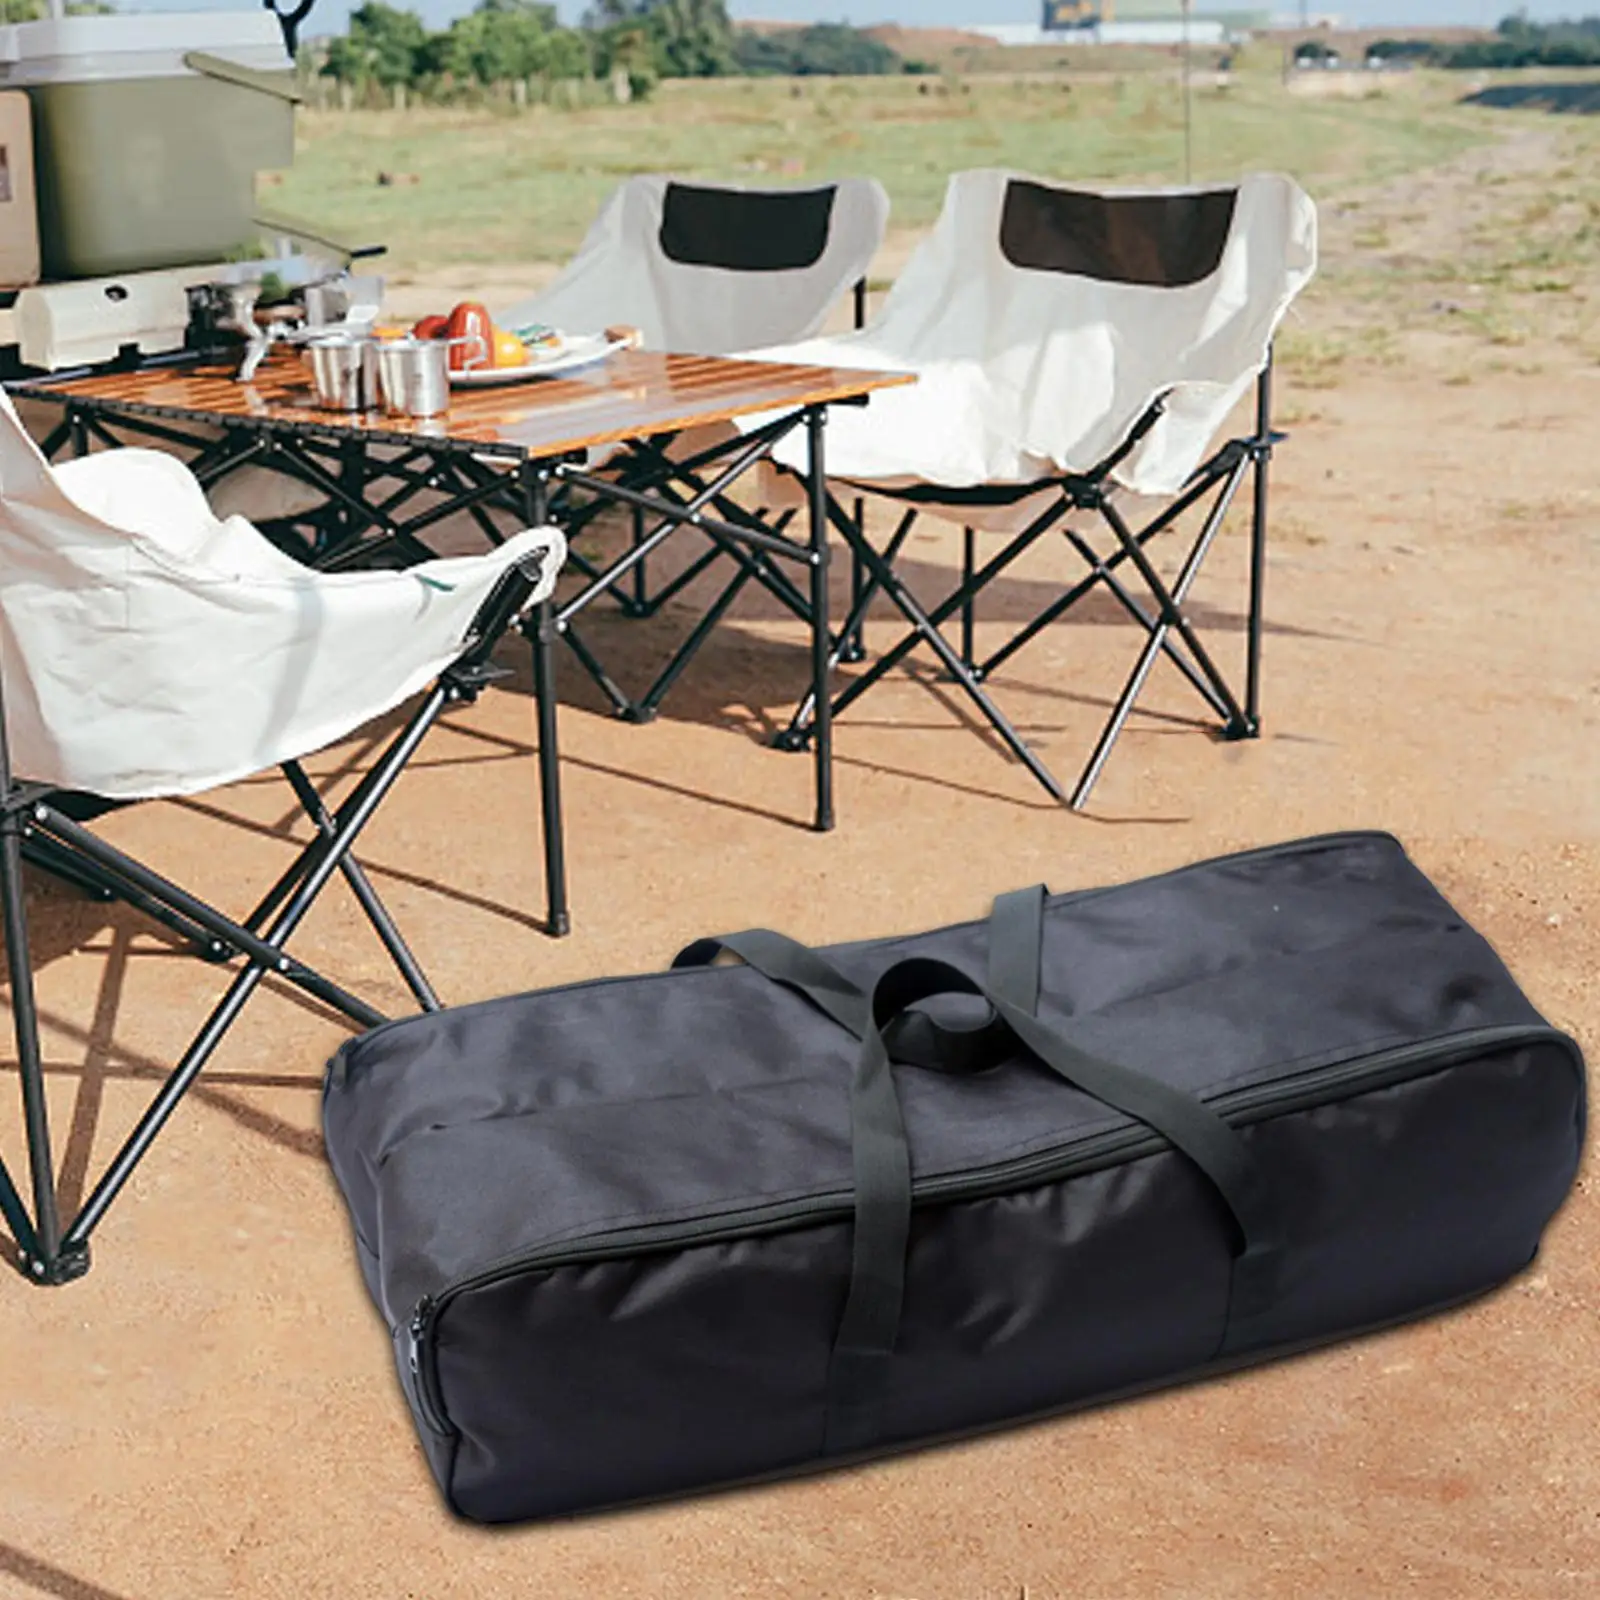 Outdoor Folding Chair Storage Bag Oxford Cloth Durable Size 26.4x11.4x7.5inch Organizer Pouch Waterproof Black Carrying Bag